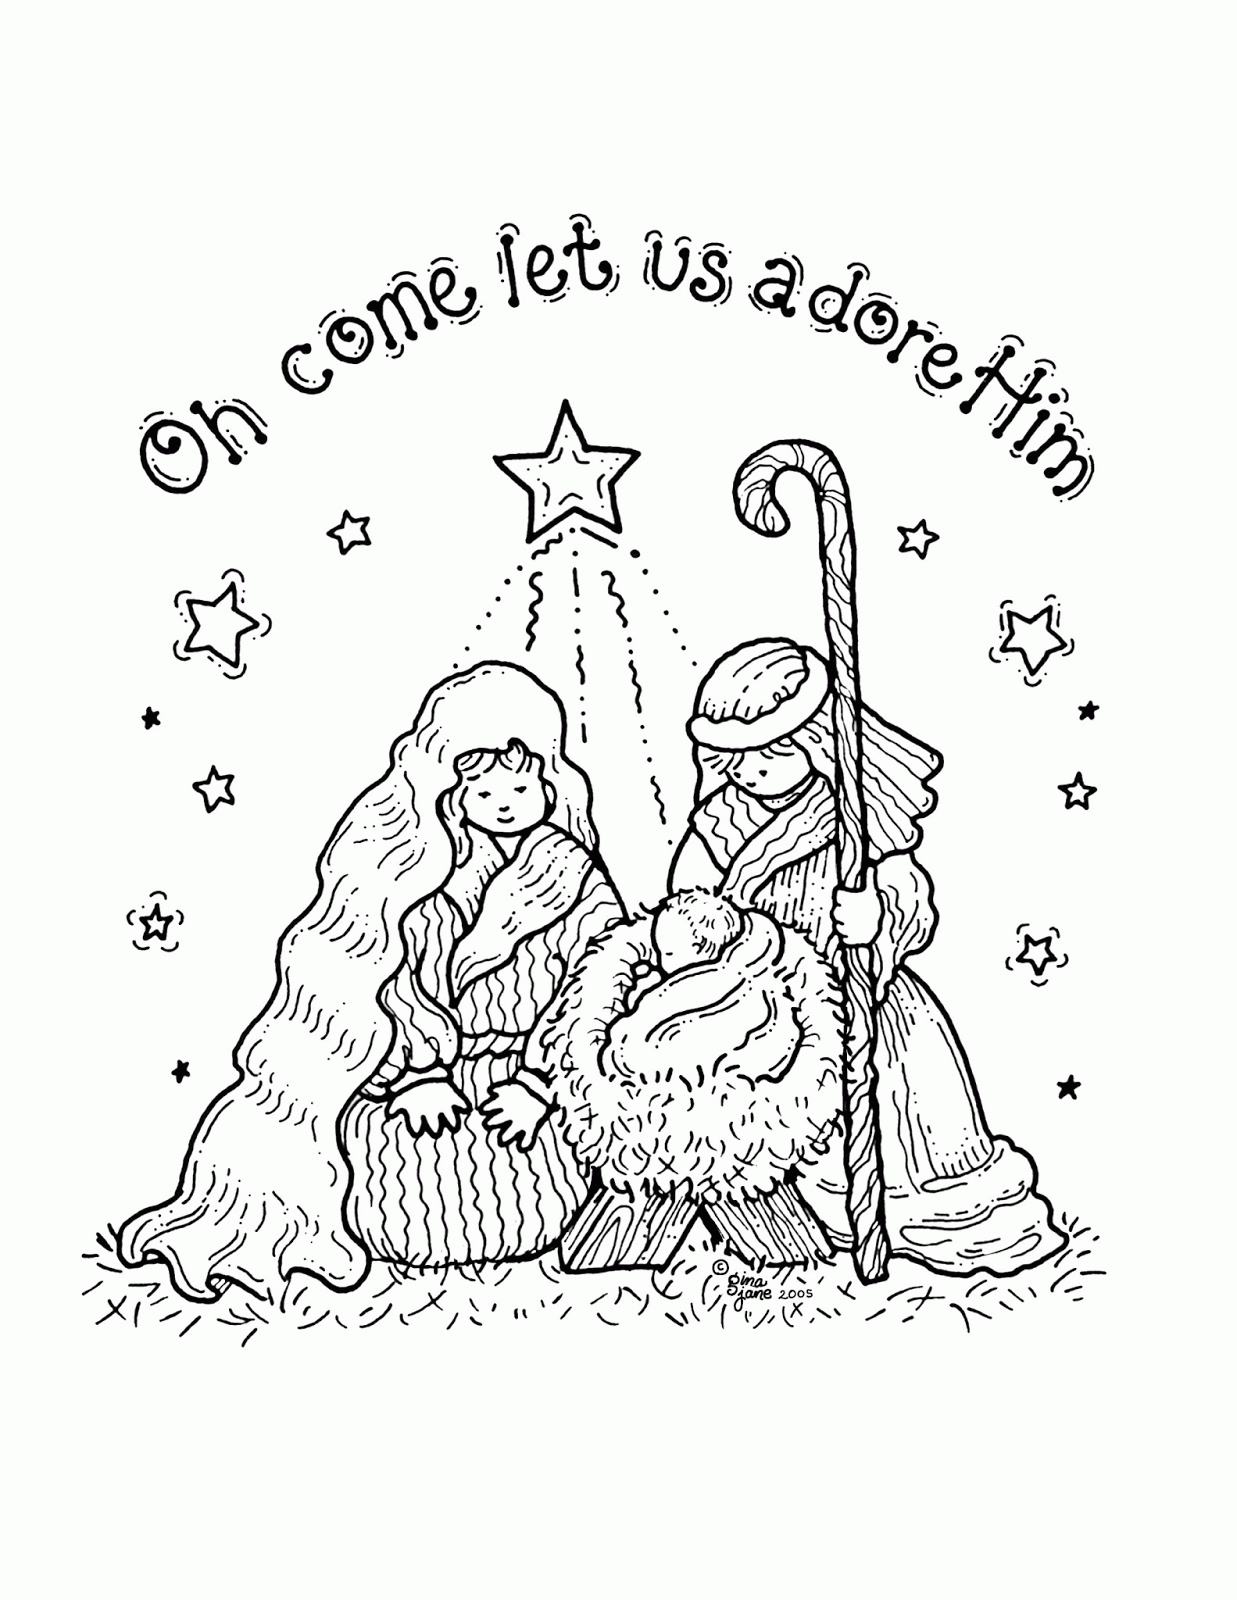 Baby Jesus Coloring Pages To Print - Coloring Pages For All Ages